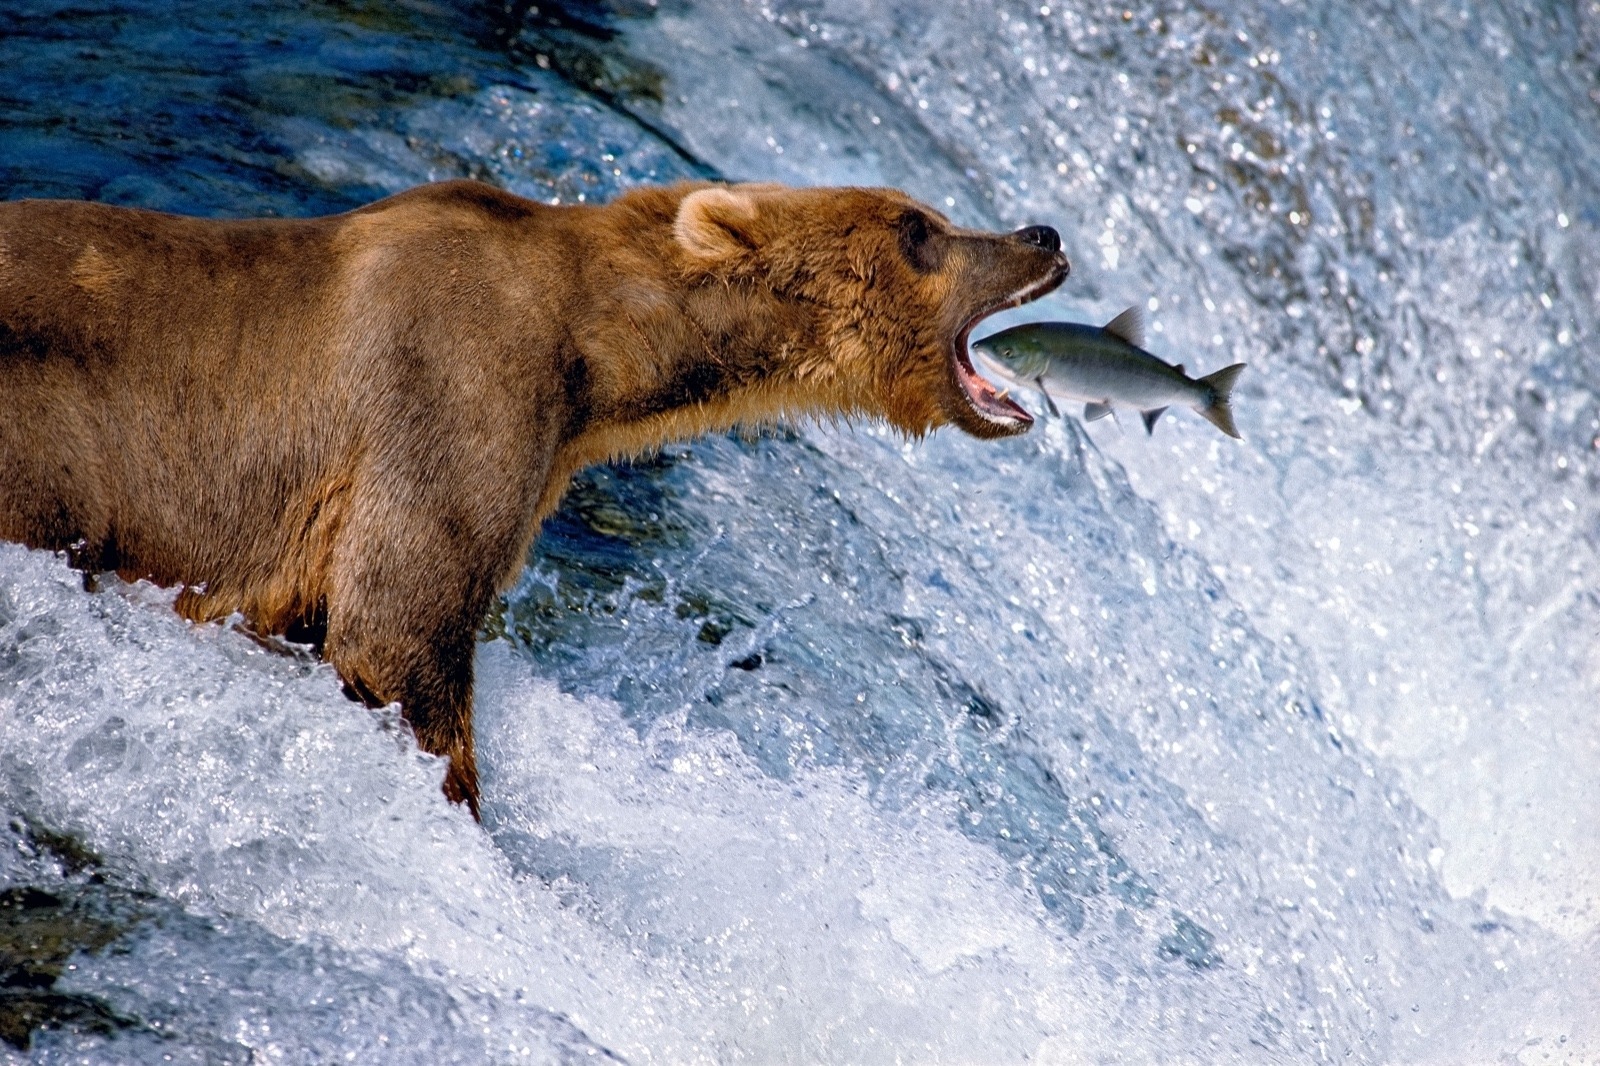 &quot;Catch of the Day&quot; by Thomas Mangelsen captures the moment that a spawning salmon in Alaska, leaping over the rapids, lands right in the jaws of an awaiting brown bear.  Produced long before the advent of Photoshop and digital technology, the image is one of the most famous wildlife photographs in modern times.  It is counted among Mangelsen's &quot;legacy&quot; images now on a national museum tour across the country.  Image courtesy Thomas D. Mangelsen